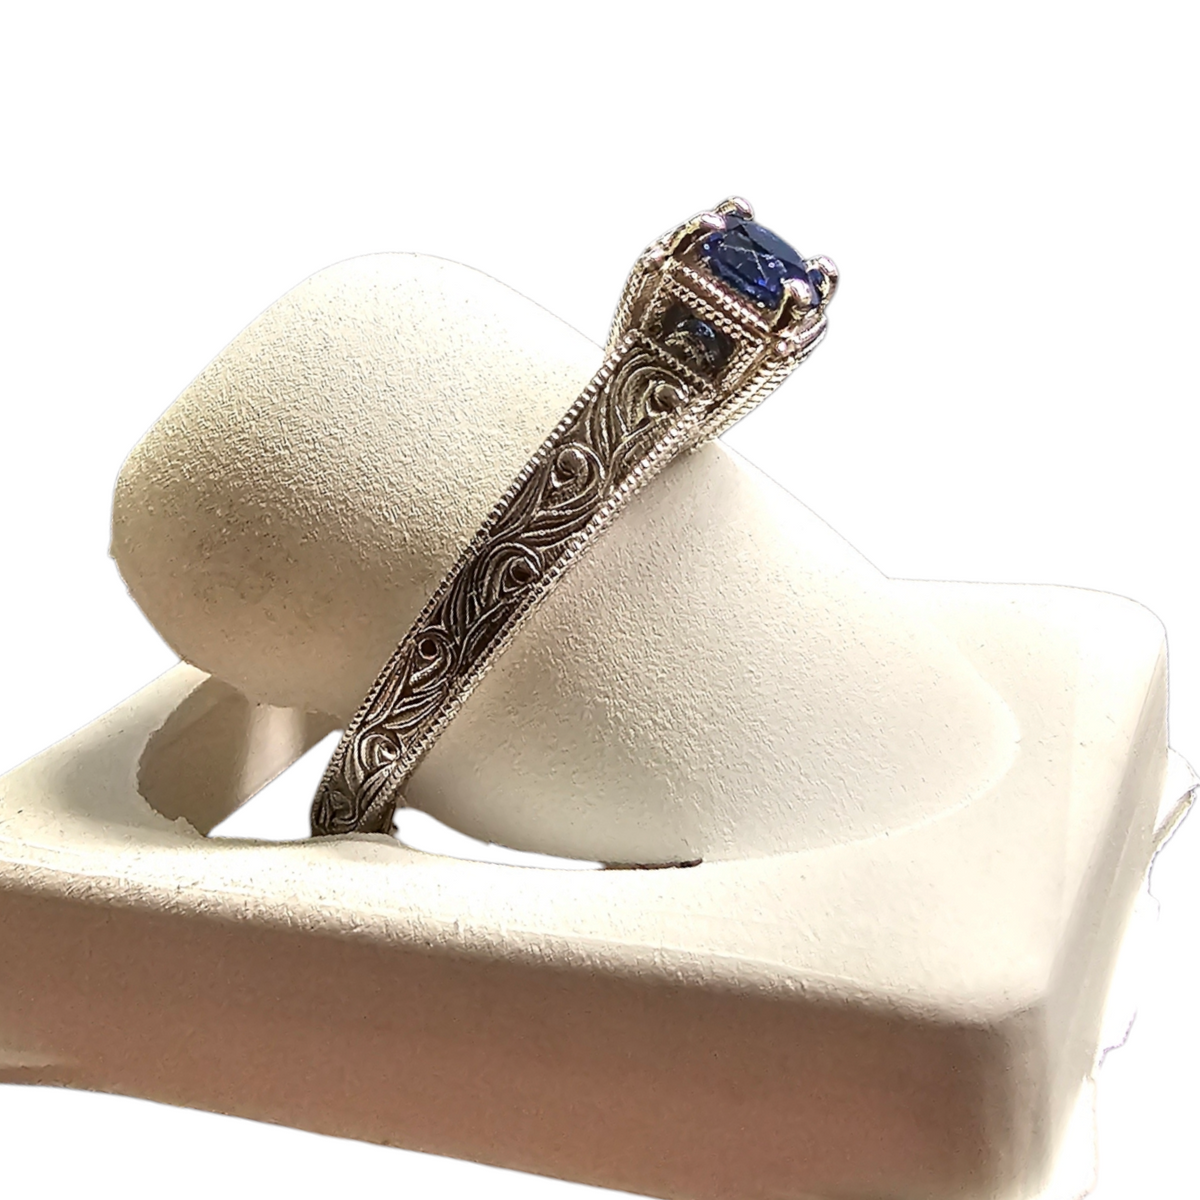 18Kt White Gold Blue Sapphire Art Deco Style Ladies Ring